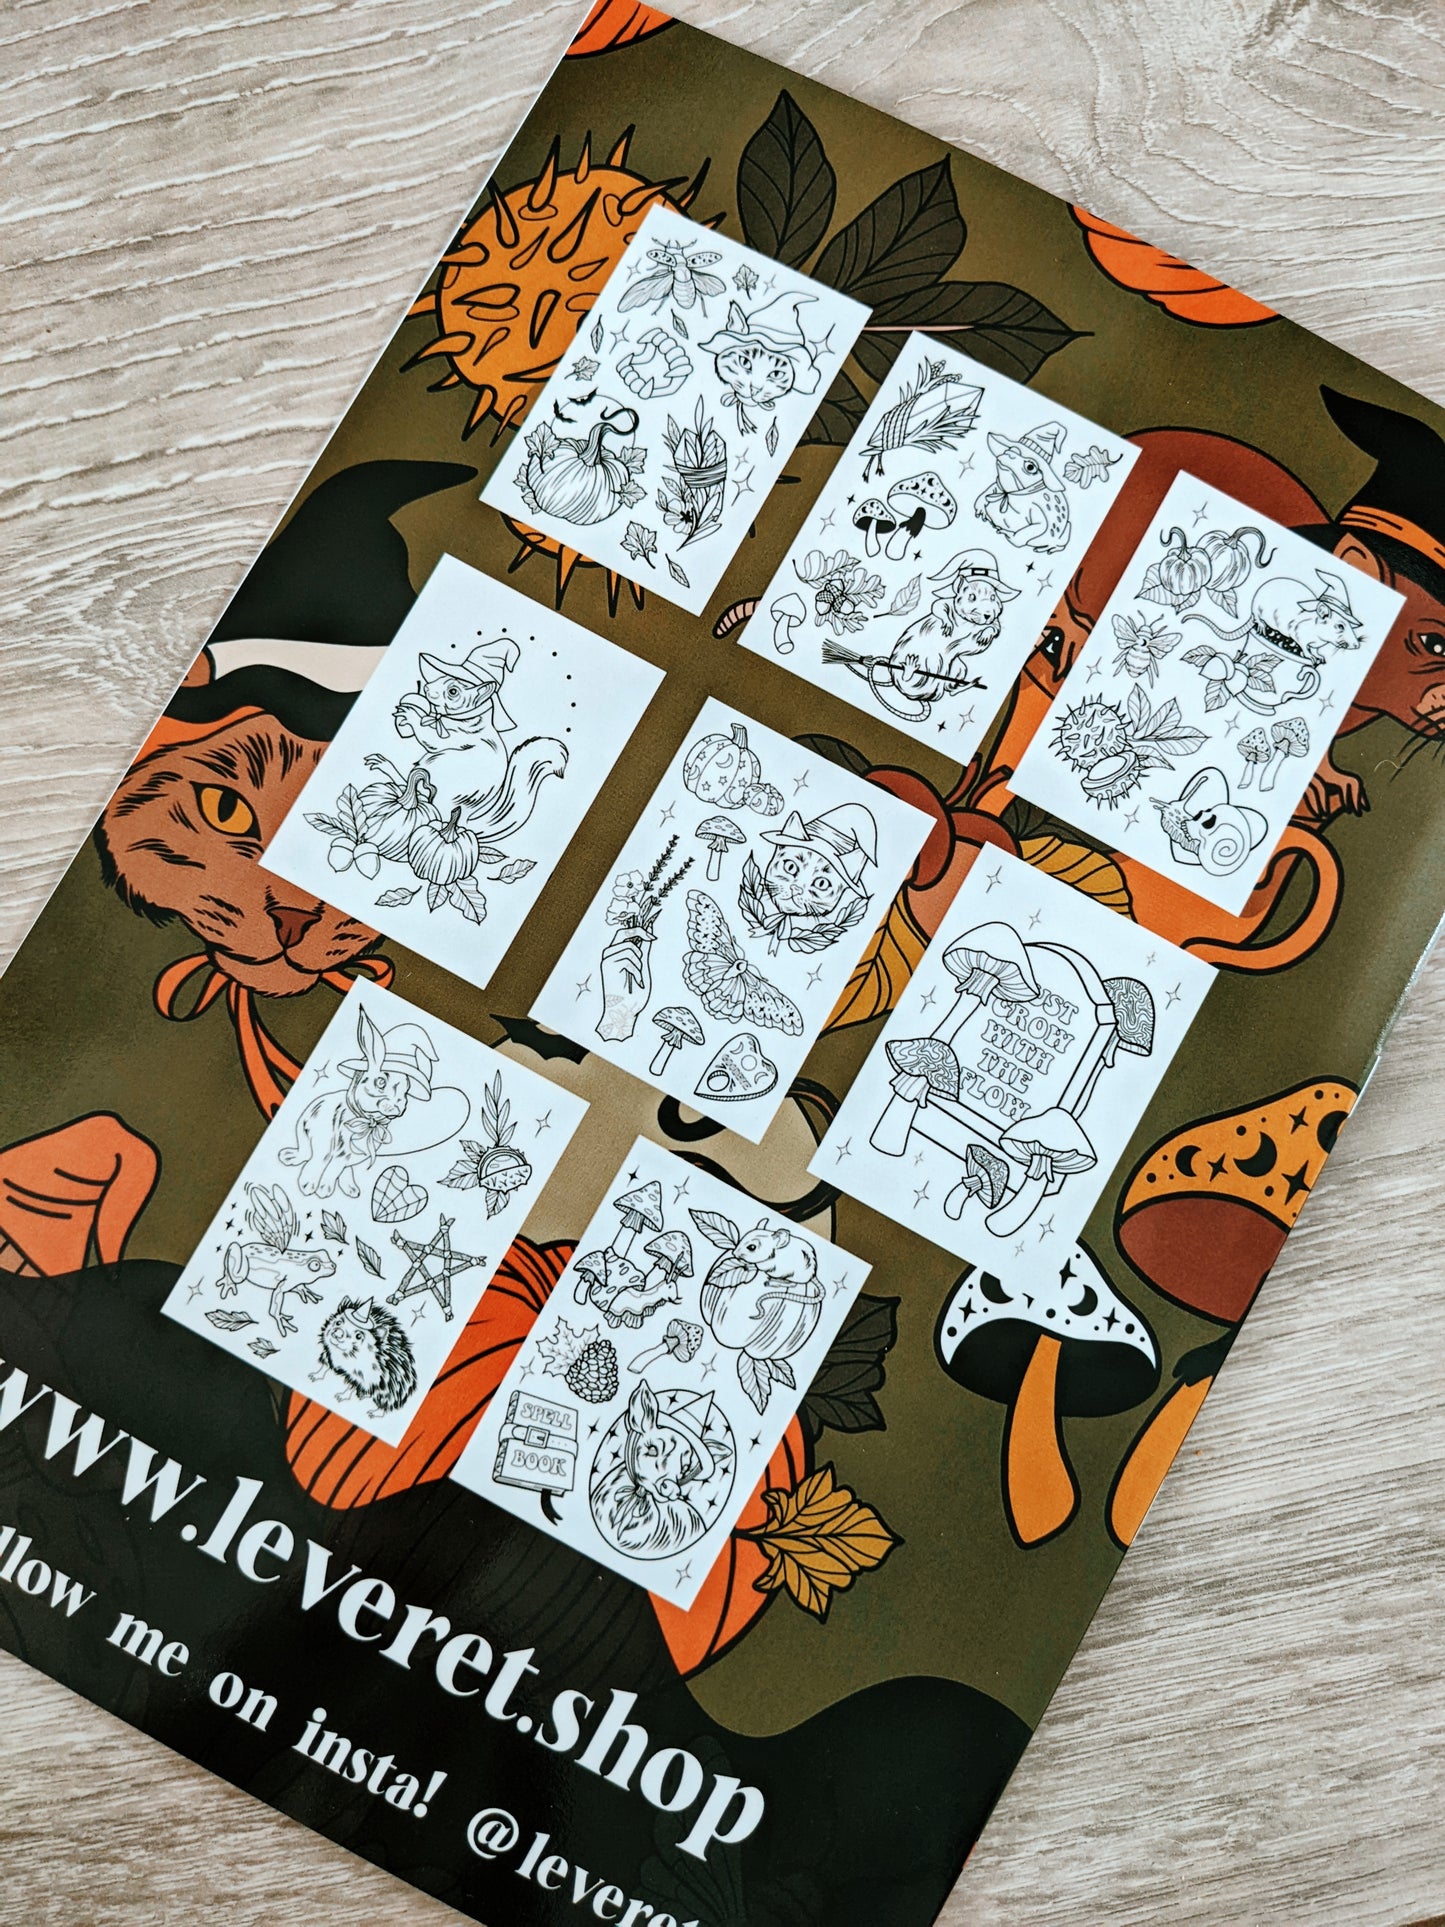 Witchy Woodland Colouring Book